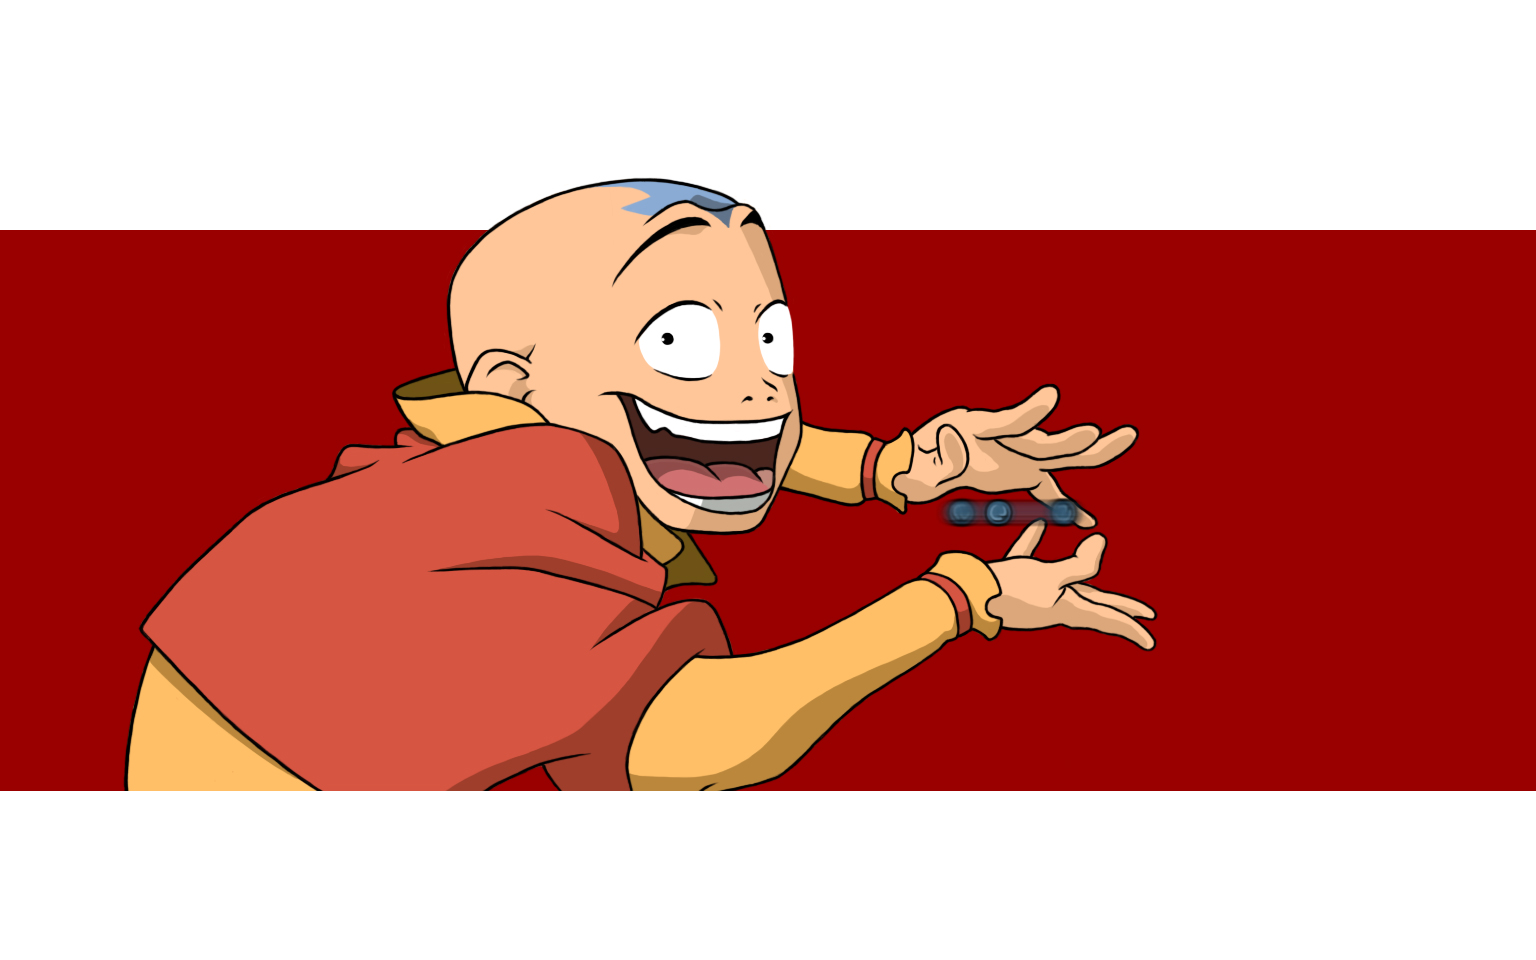 Anime 1536x960 anime Avatar: The Last Airbender Aang anime boys white red open mouth